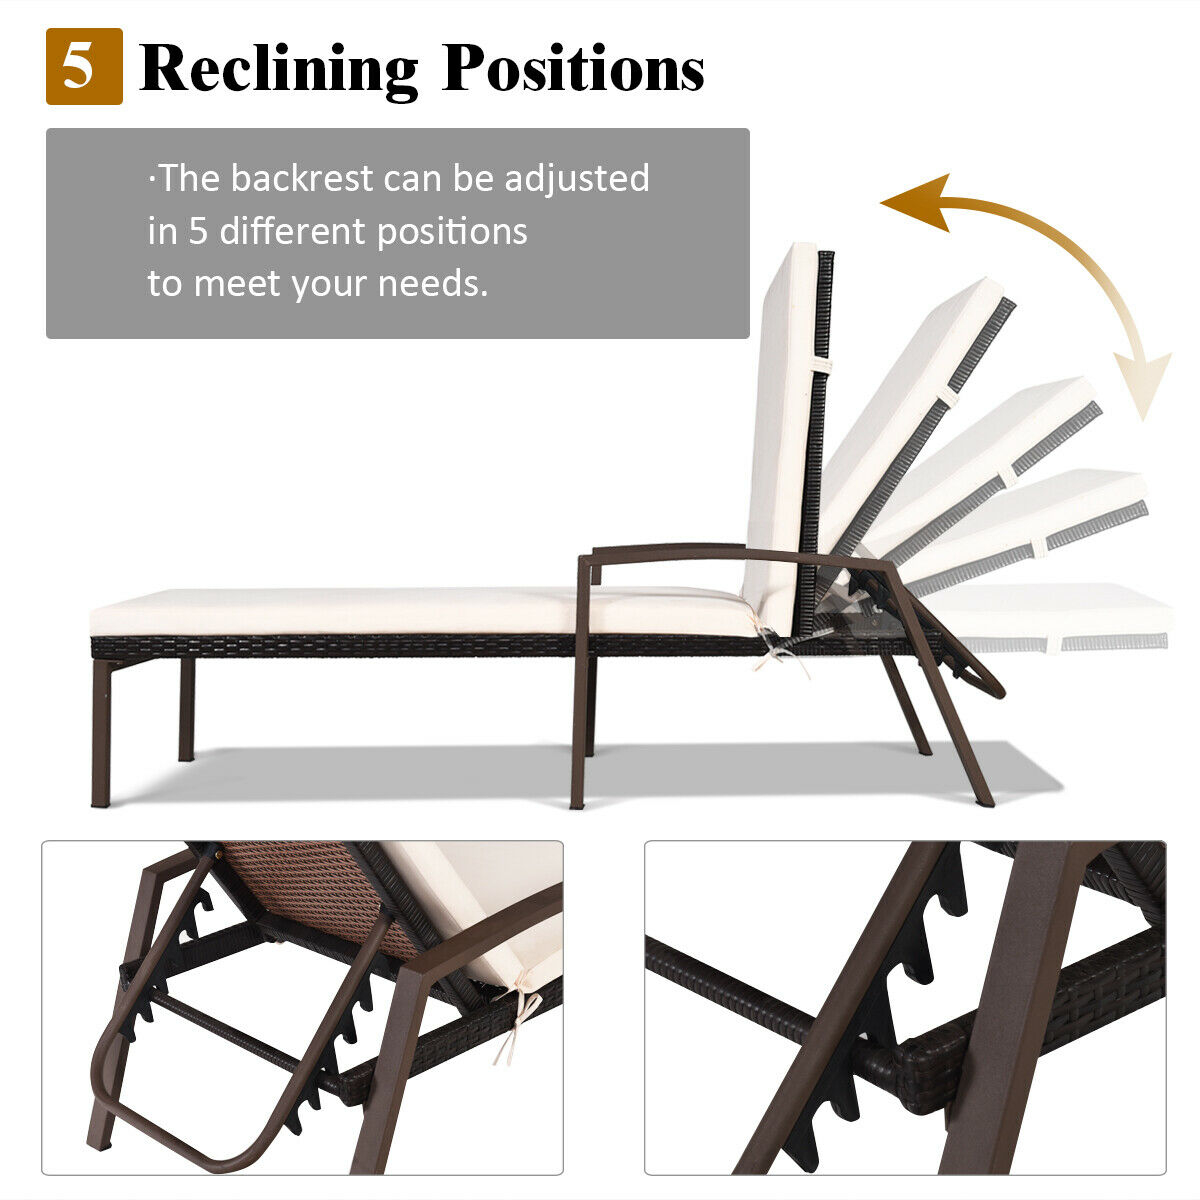 Reclining Function of Lounge Chair